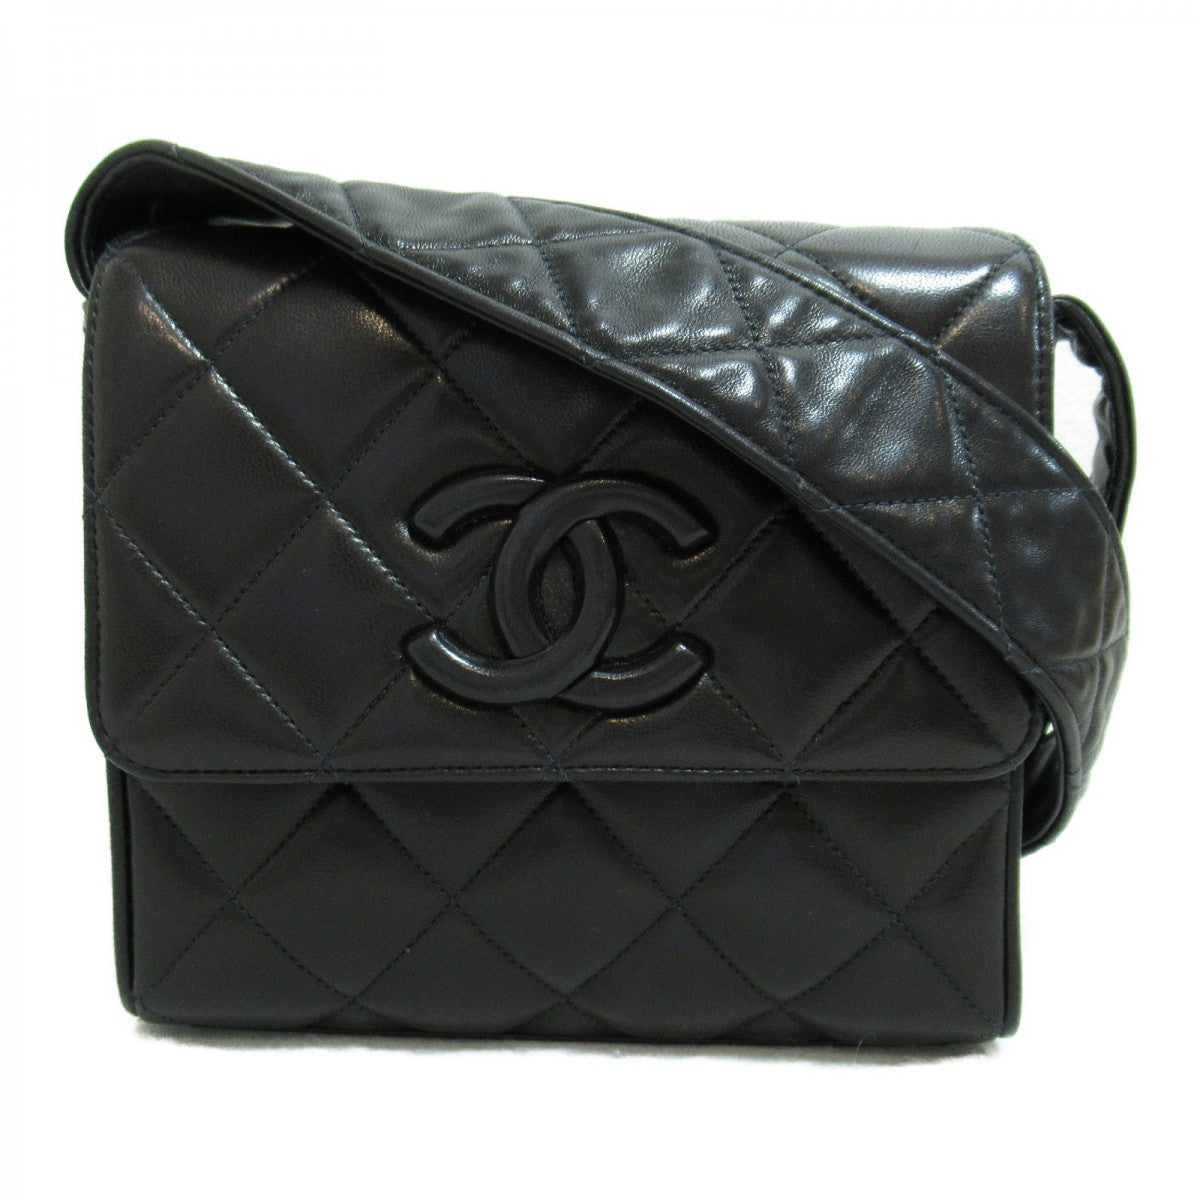 CC Quilted Leather Flap Crossbody Bag